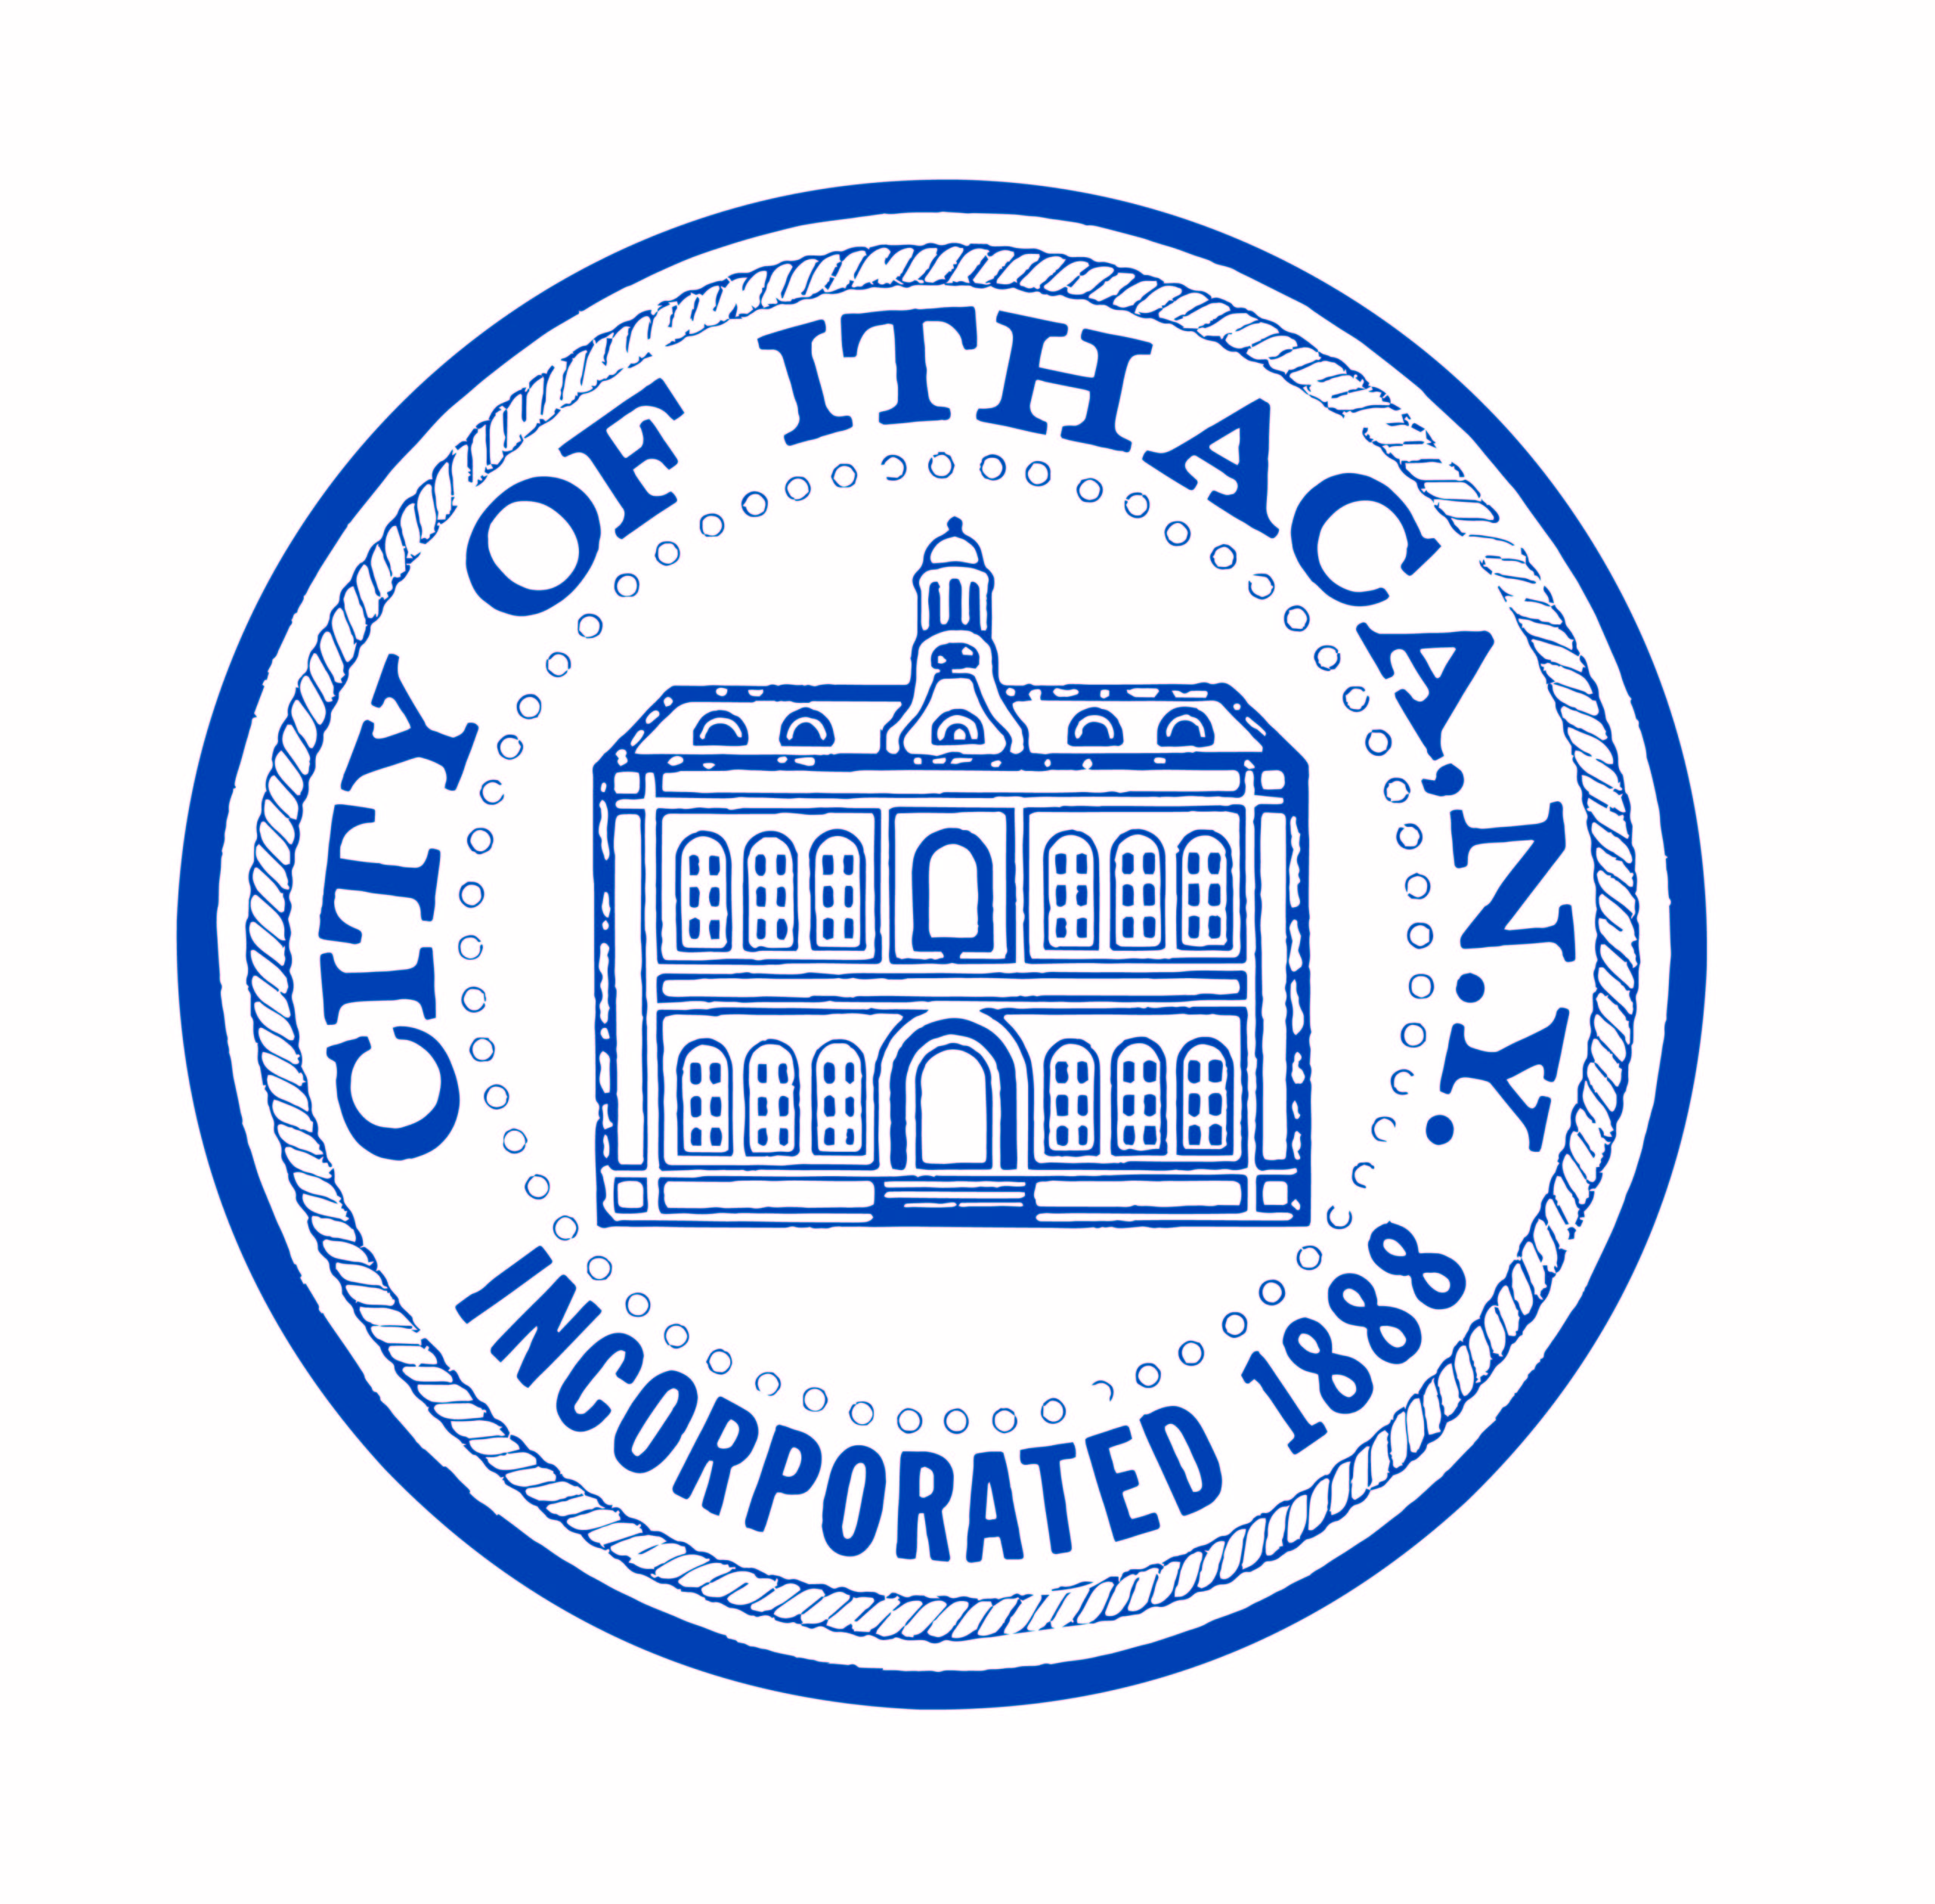 City of Ithaca Seal